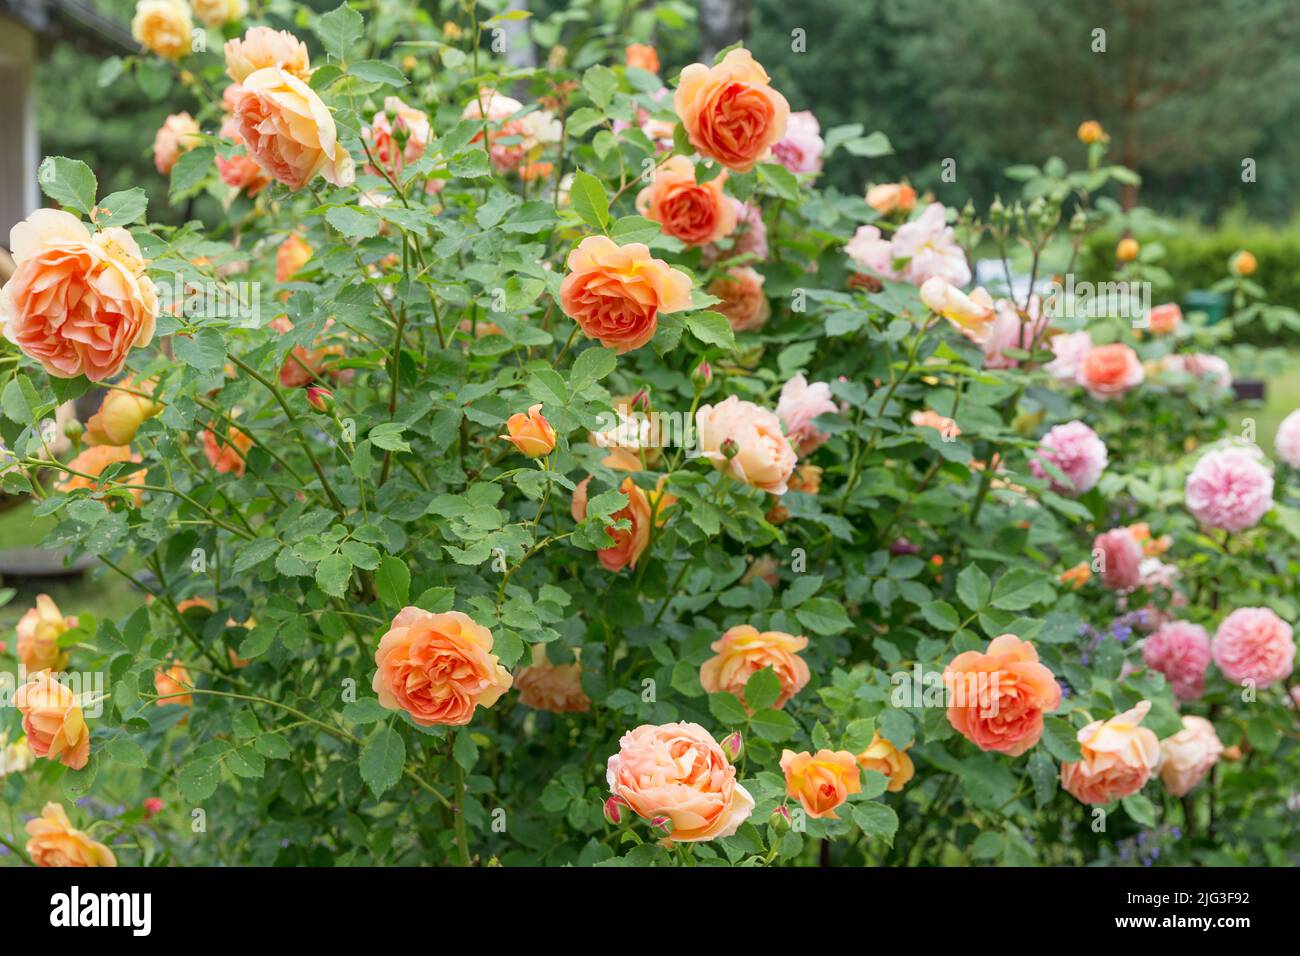 Rich orange-red rosebuds open in cup-shaped flowers. Lovely bush of English roses in the summer garden Stock Photo